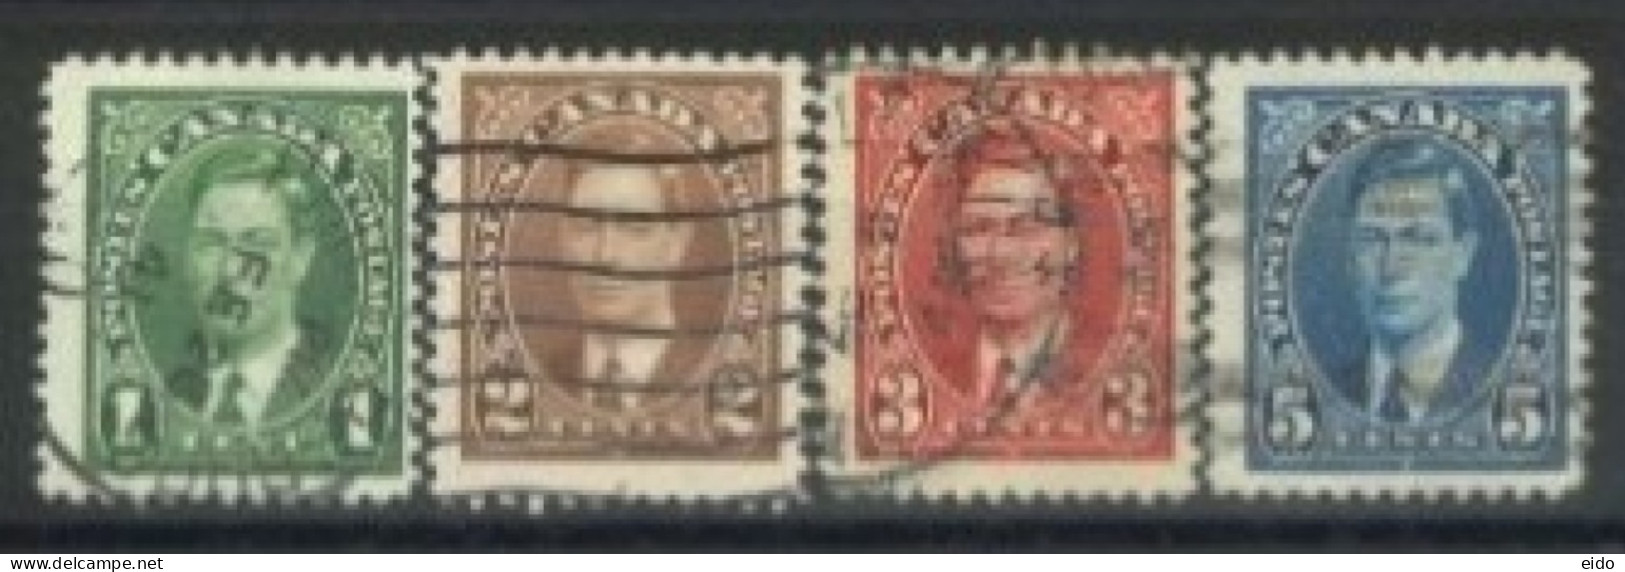 CANADA - 1937, KING GEORGE VI STAMPS SET OF 4, USED. - Usati